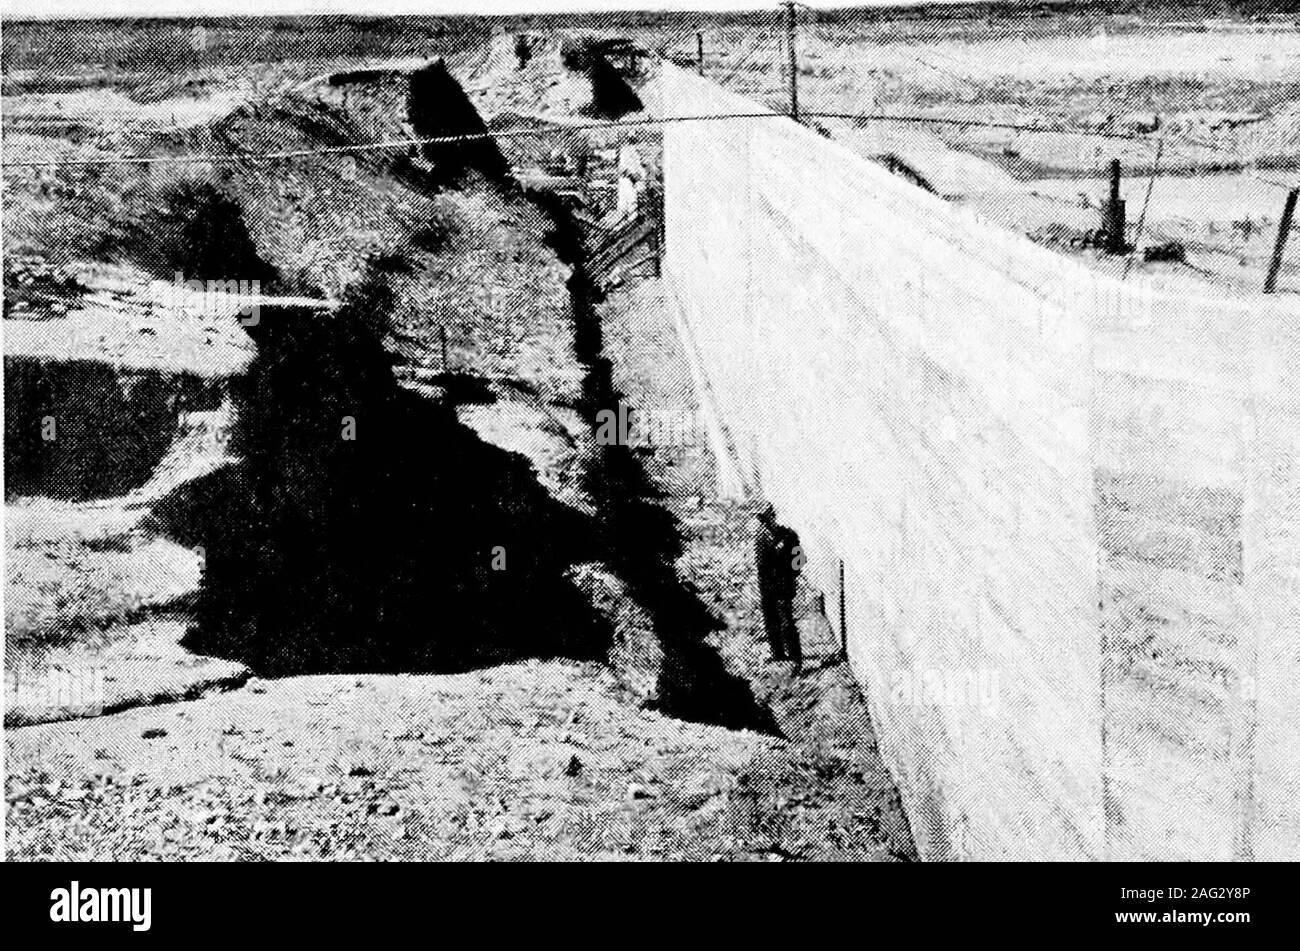 . Principles of irrigation engineering, arid lands, water supply, storage works, dams, canals, water rights and products. Scale Fig. 45-—Cross-section of earth dike with pavement on water side. The term dike is also applied to a long, relatively low extension ofan earth dam where the topography of the coimtry is such that thedam must be continued for some distance across low grounds. Itfrequently happens that in the prolongation of an earth dam thetopography is such that rising ground cuts out the necessity of thedam or dike for a space of a few hundred or thousand feet and thena depression oc Stock Photo